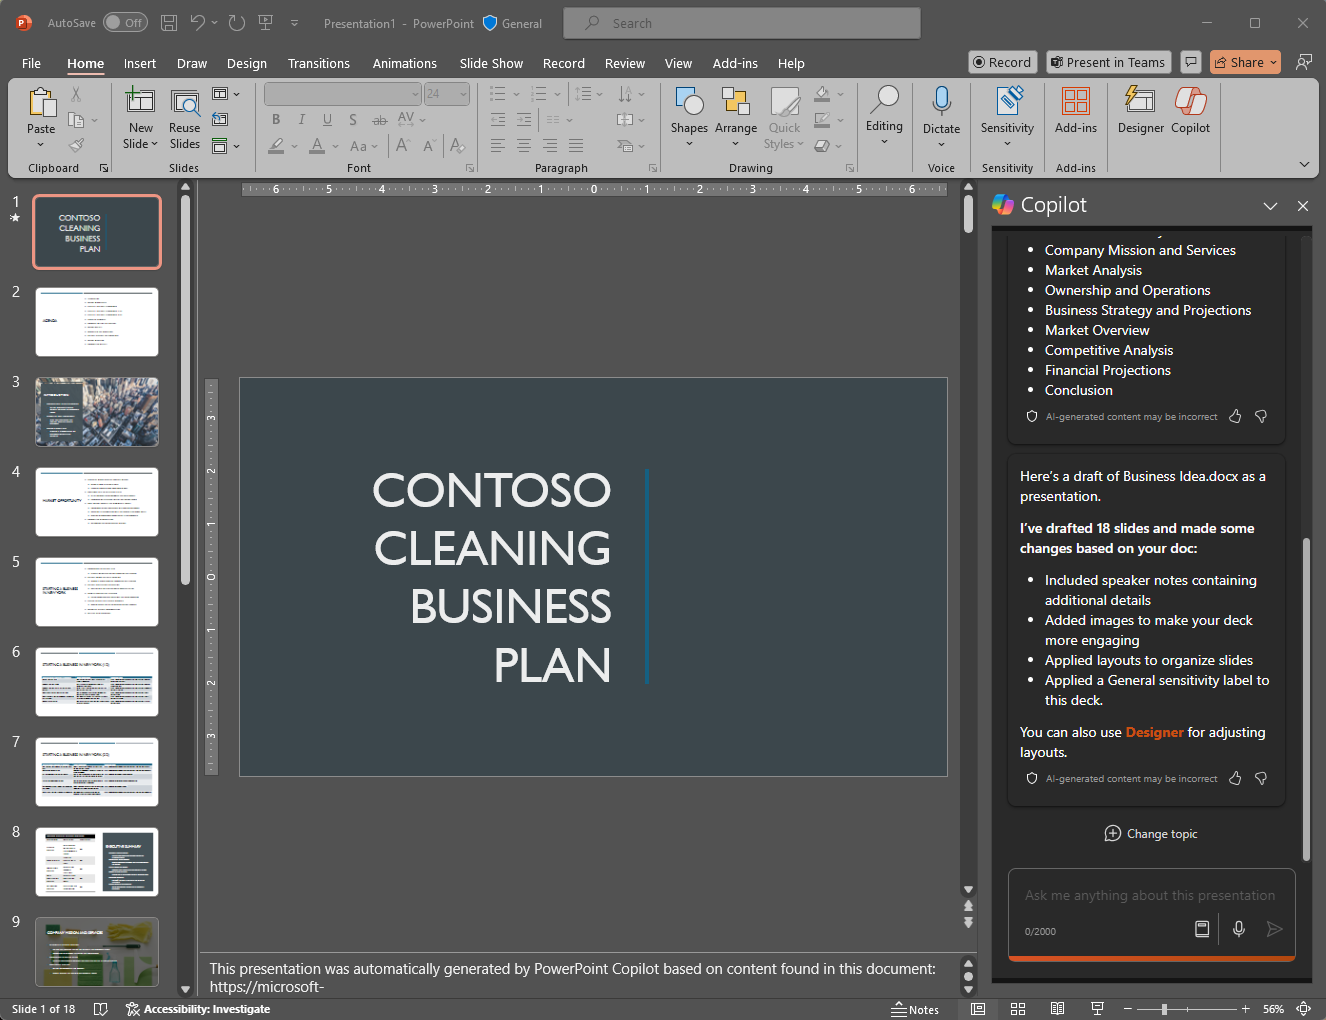 Screenshot of PowerPoint presentation created by Copilot from a Word document.